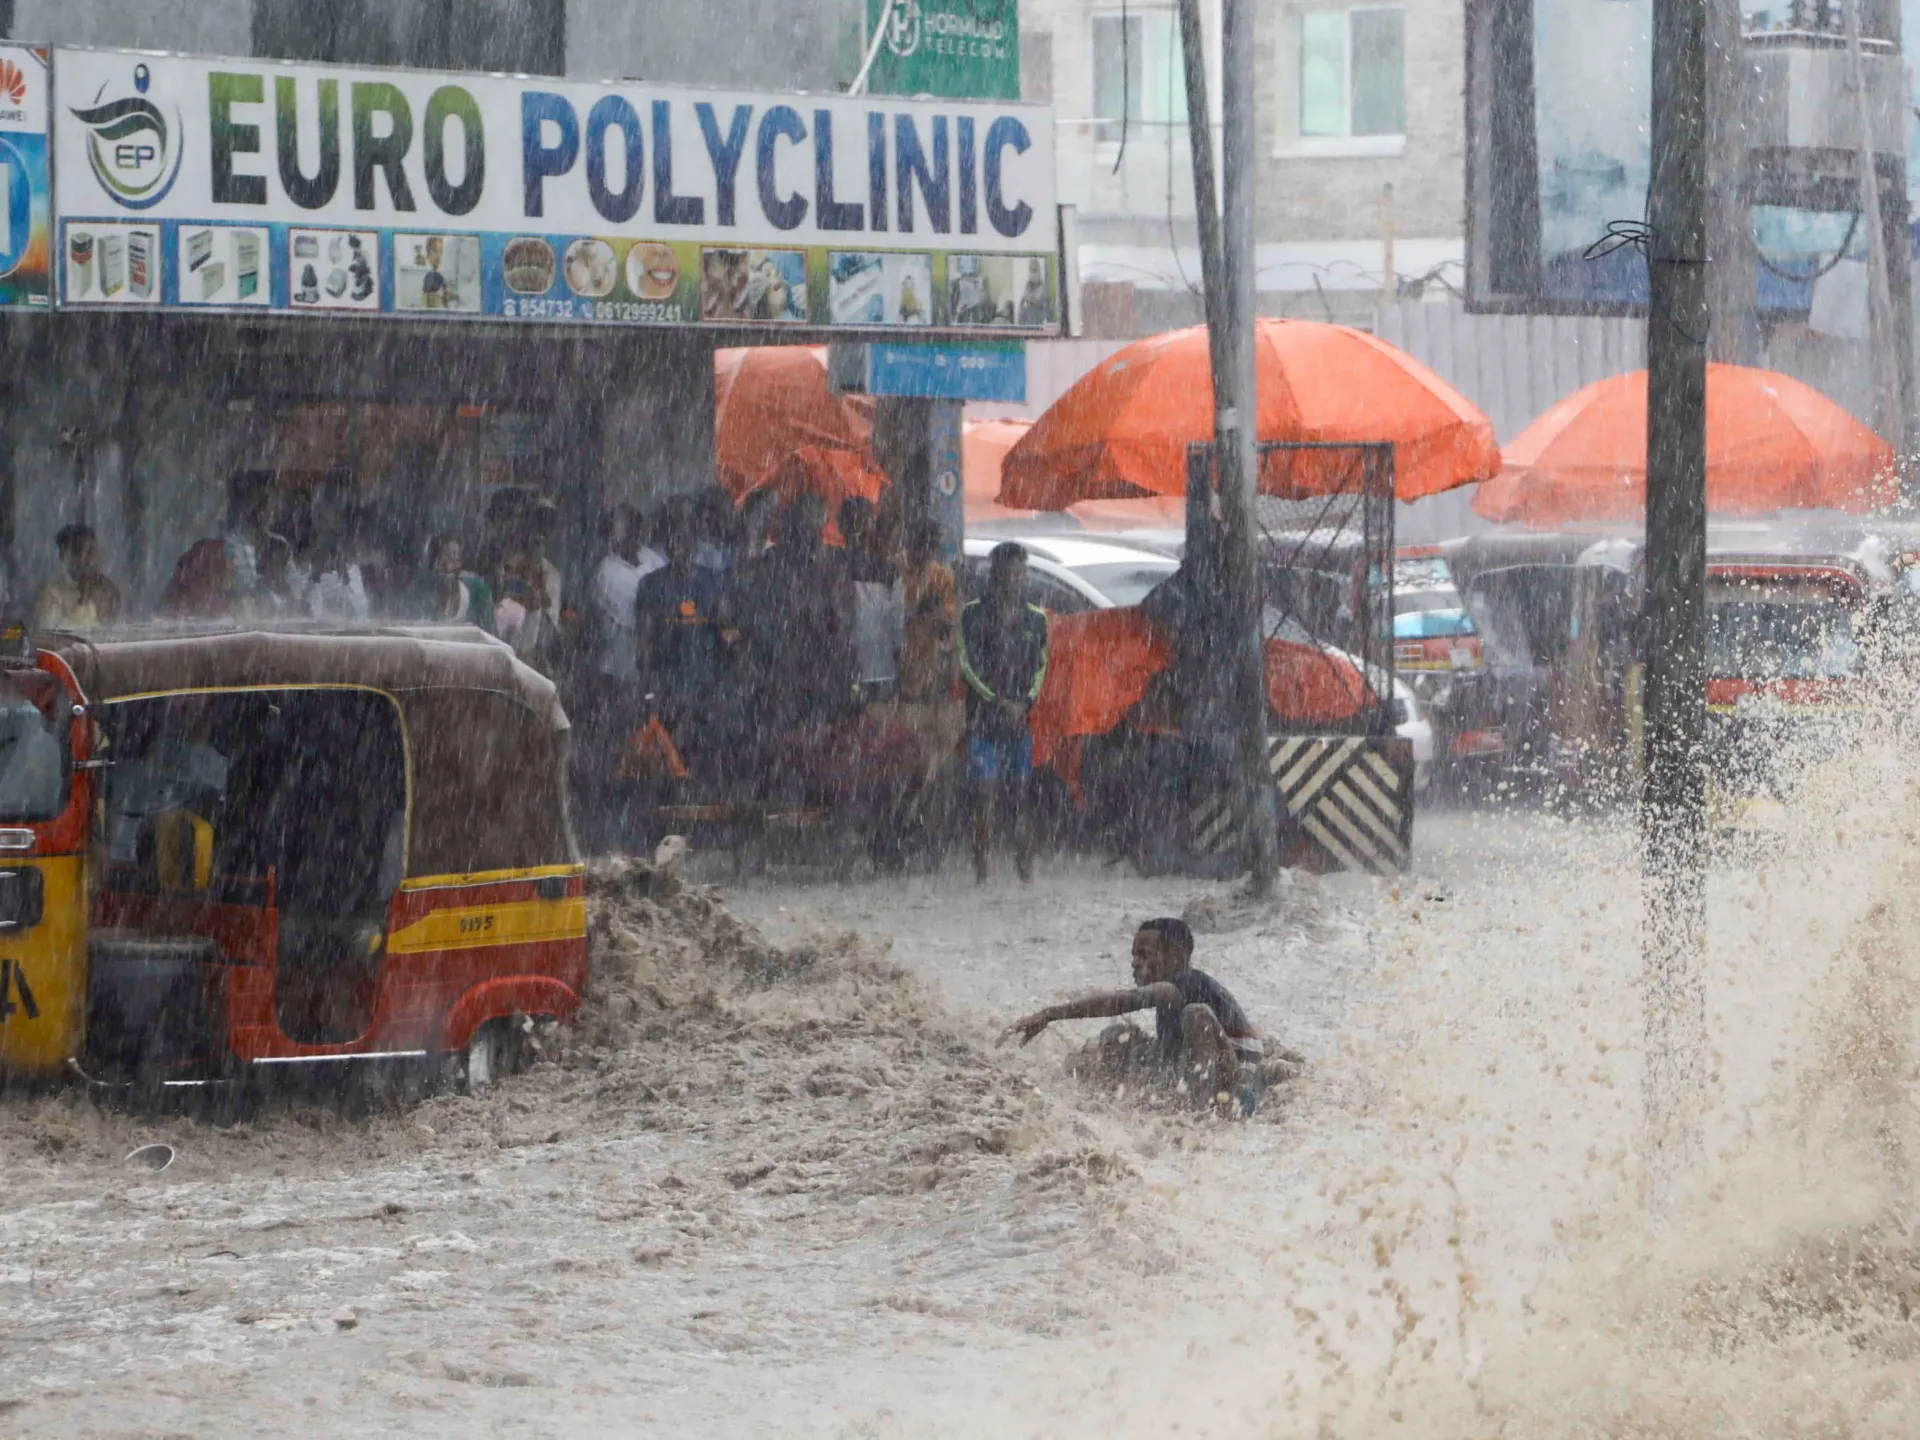 At least 155 killed in Tanzania as heavy rains pound East Africa